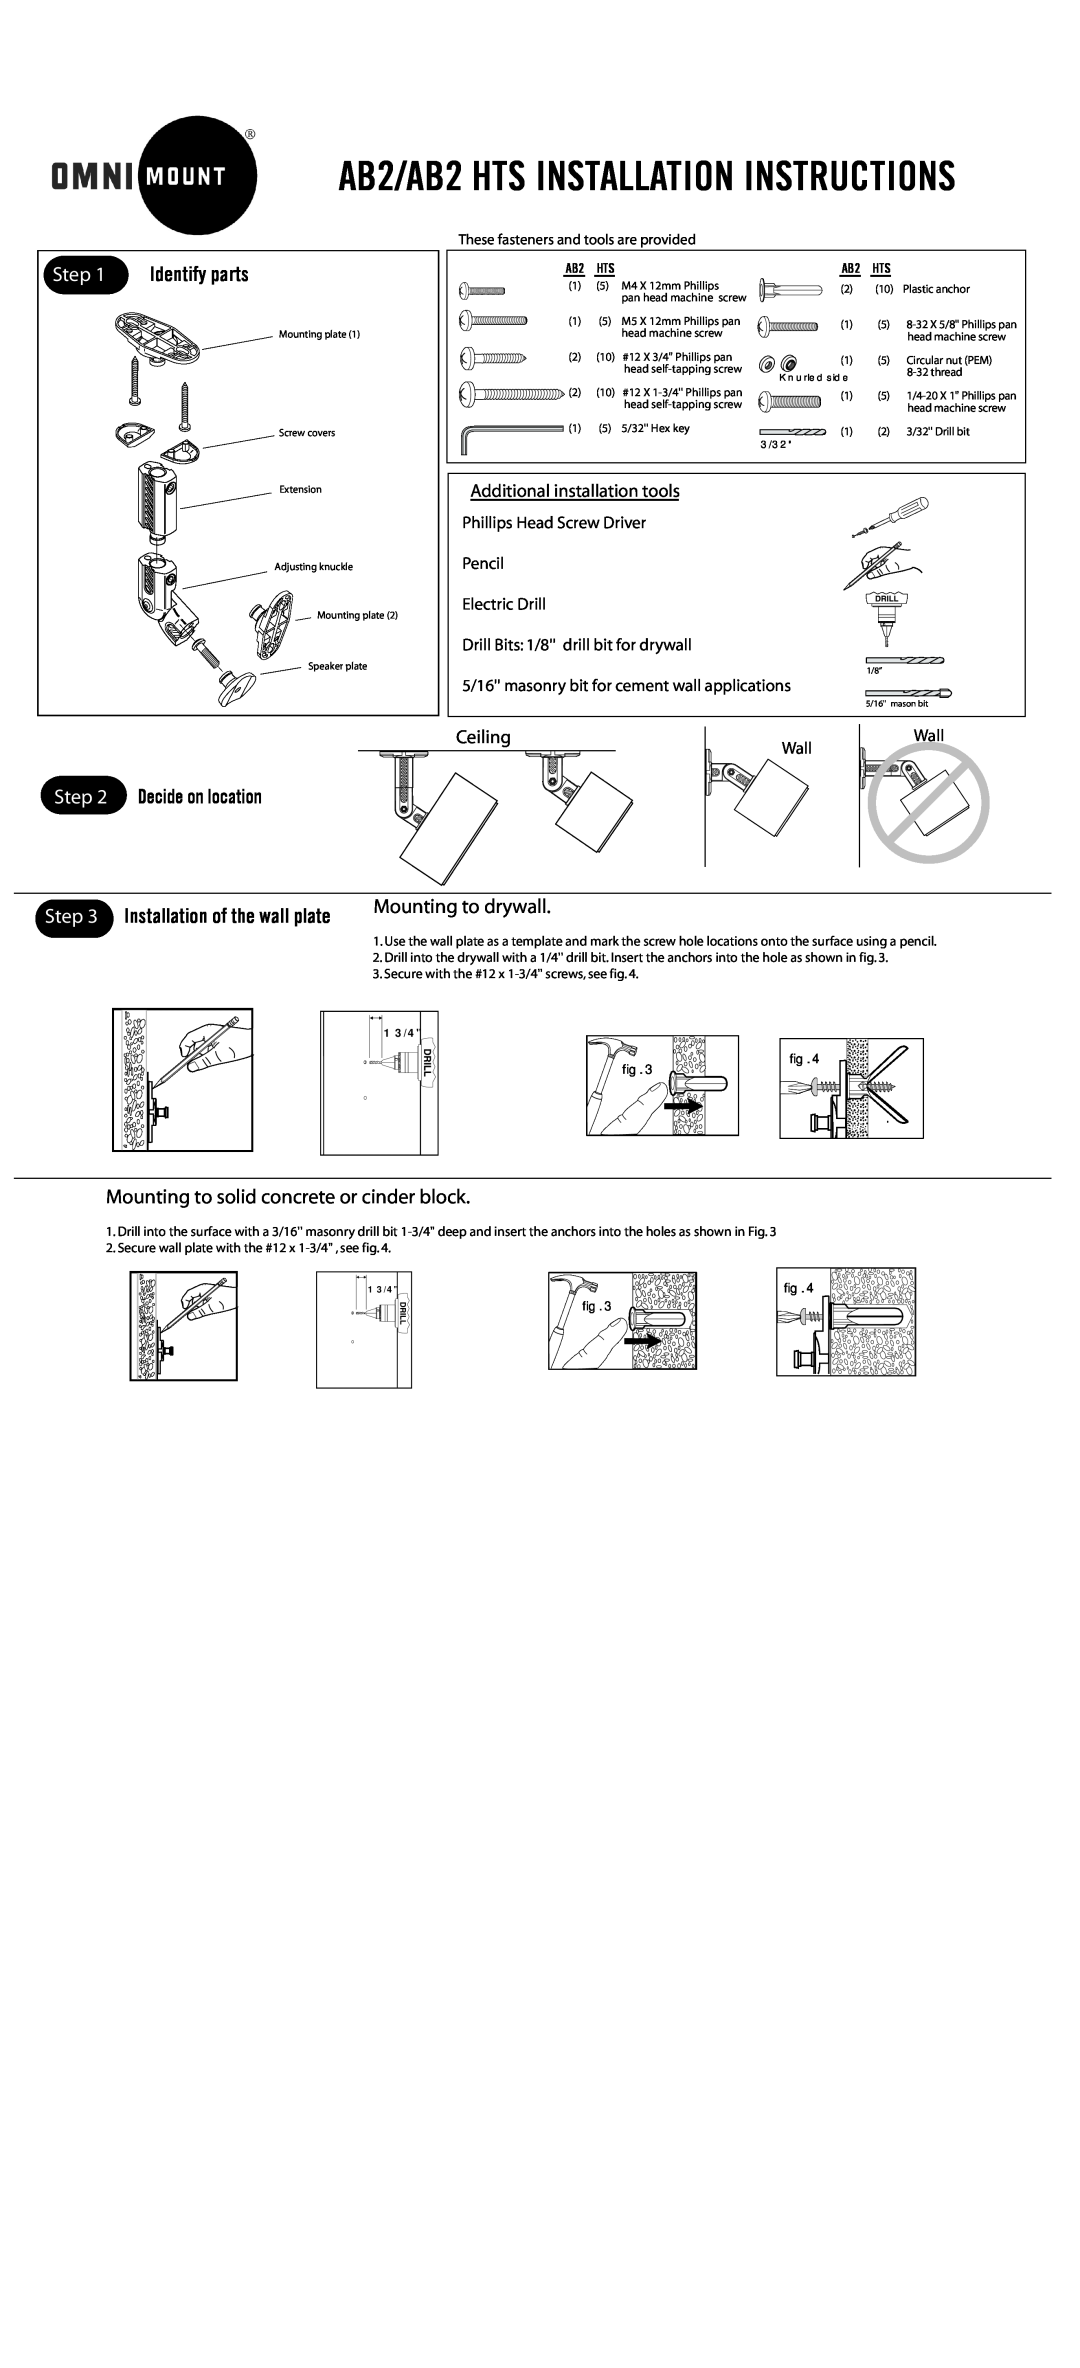 Omnimount AB2 installation instructions Step, Identify parts, Decide on location, Installation of the wall plate, Ceiling 